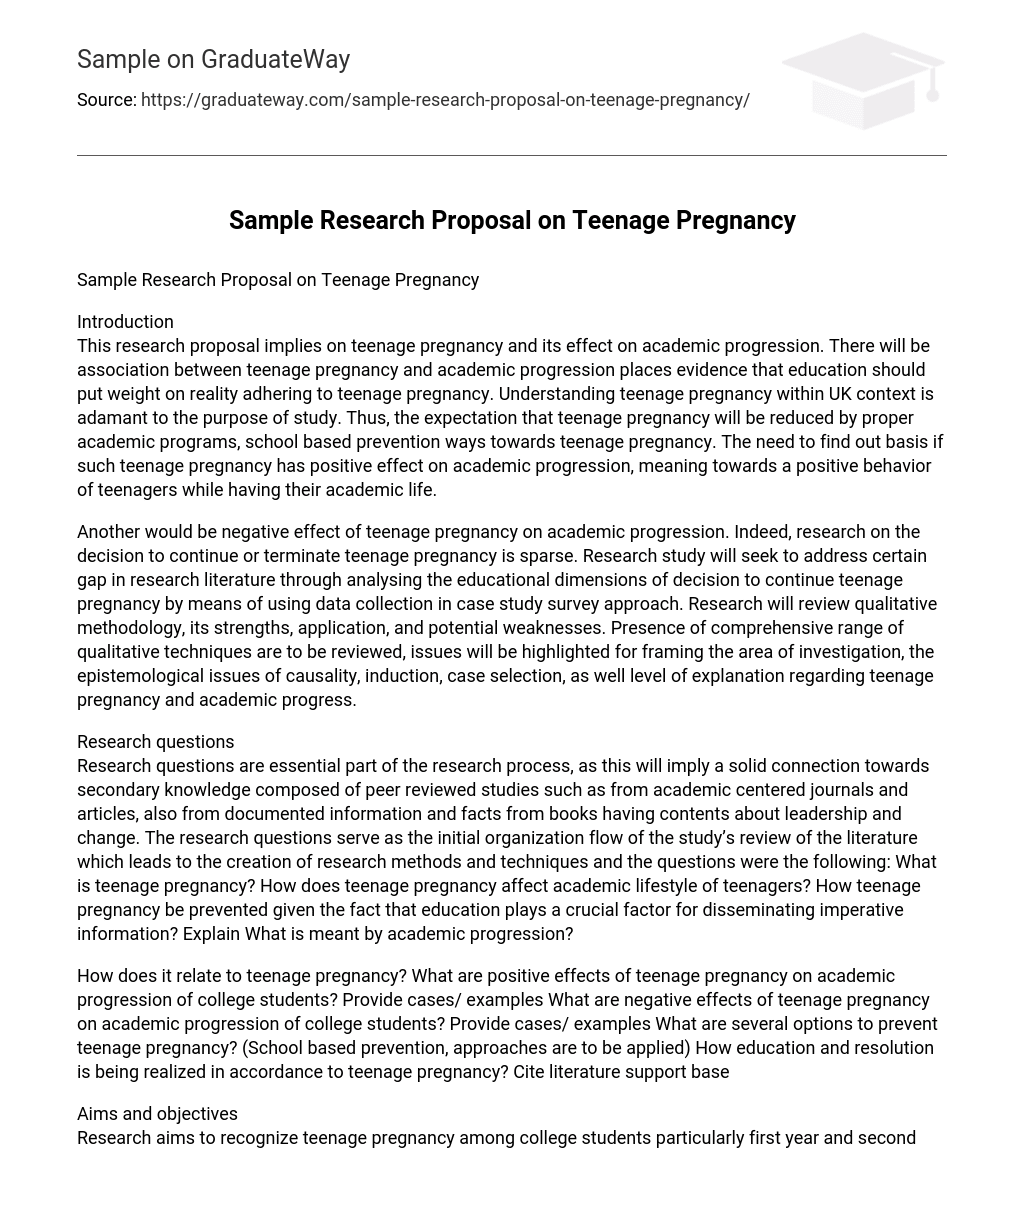 Sample Research Proposal on Teenage Pregnancy